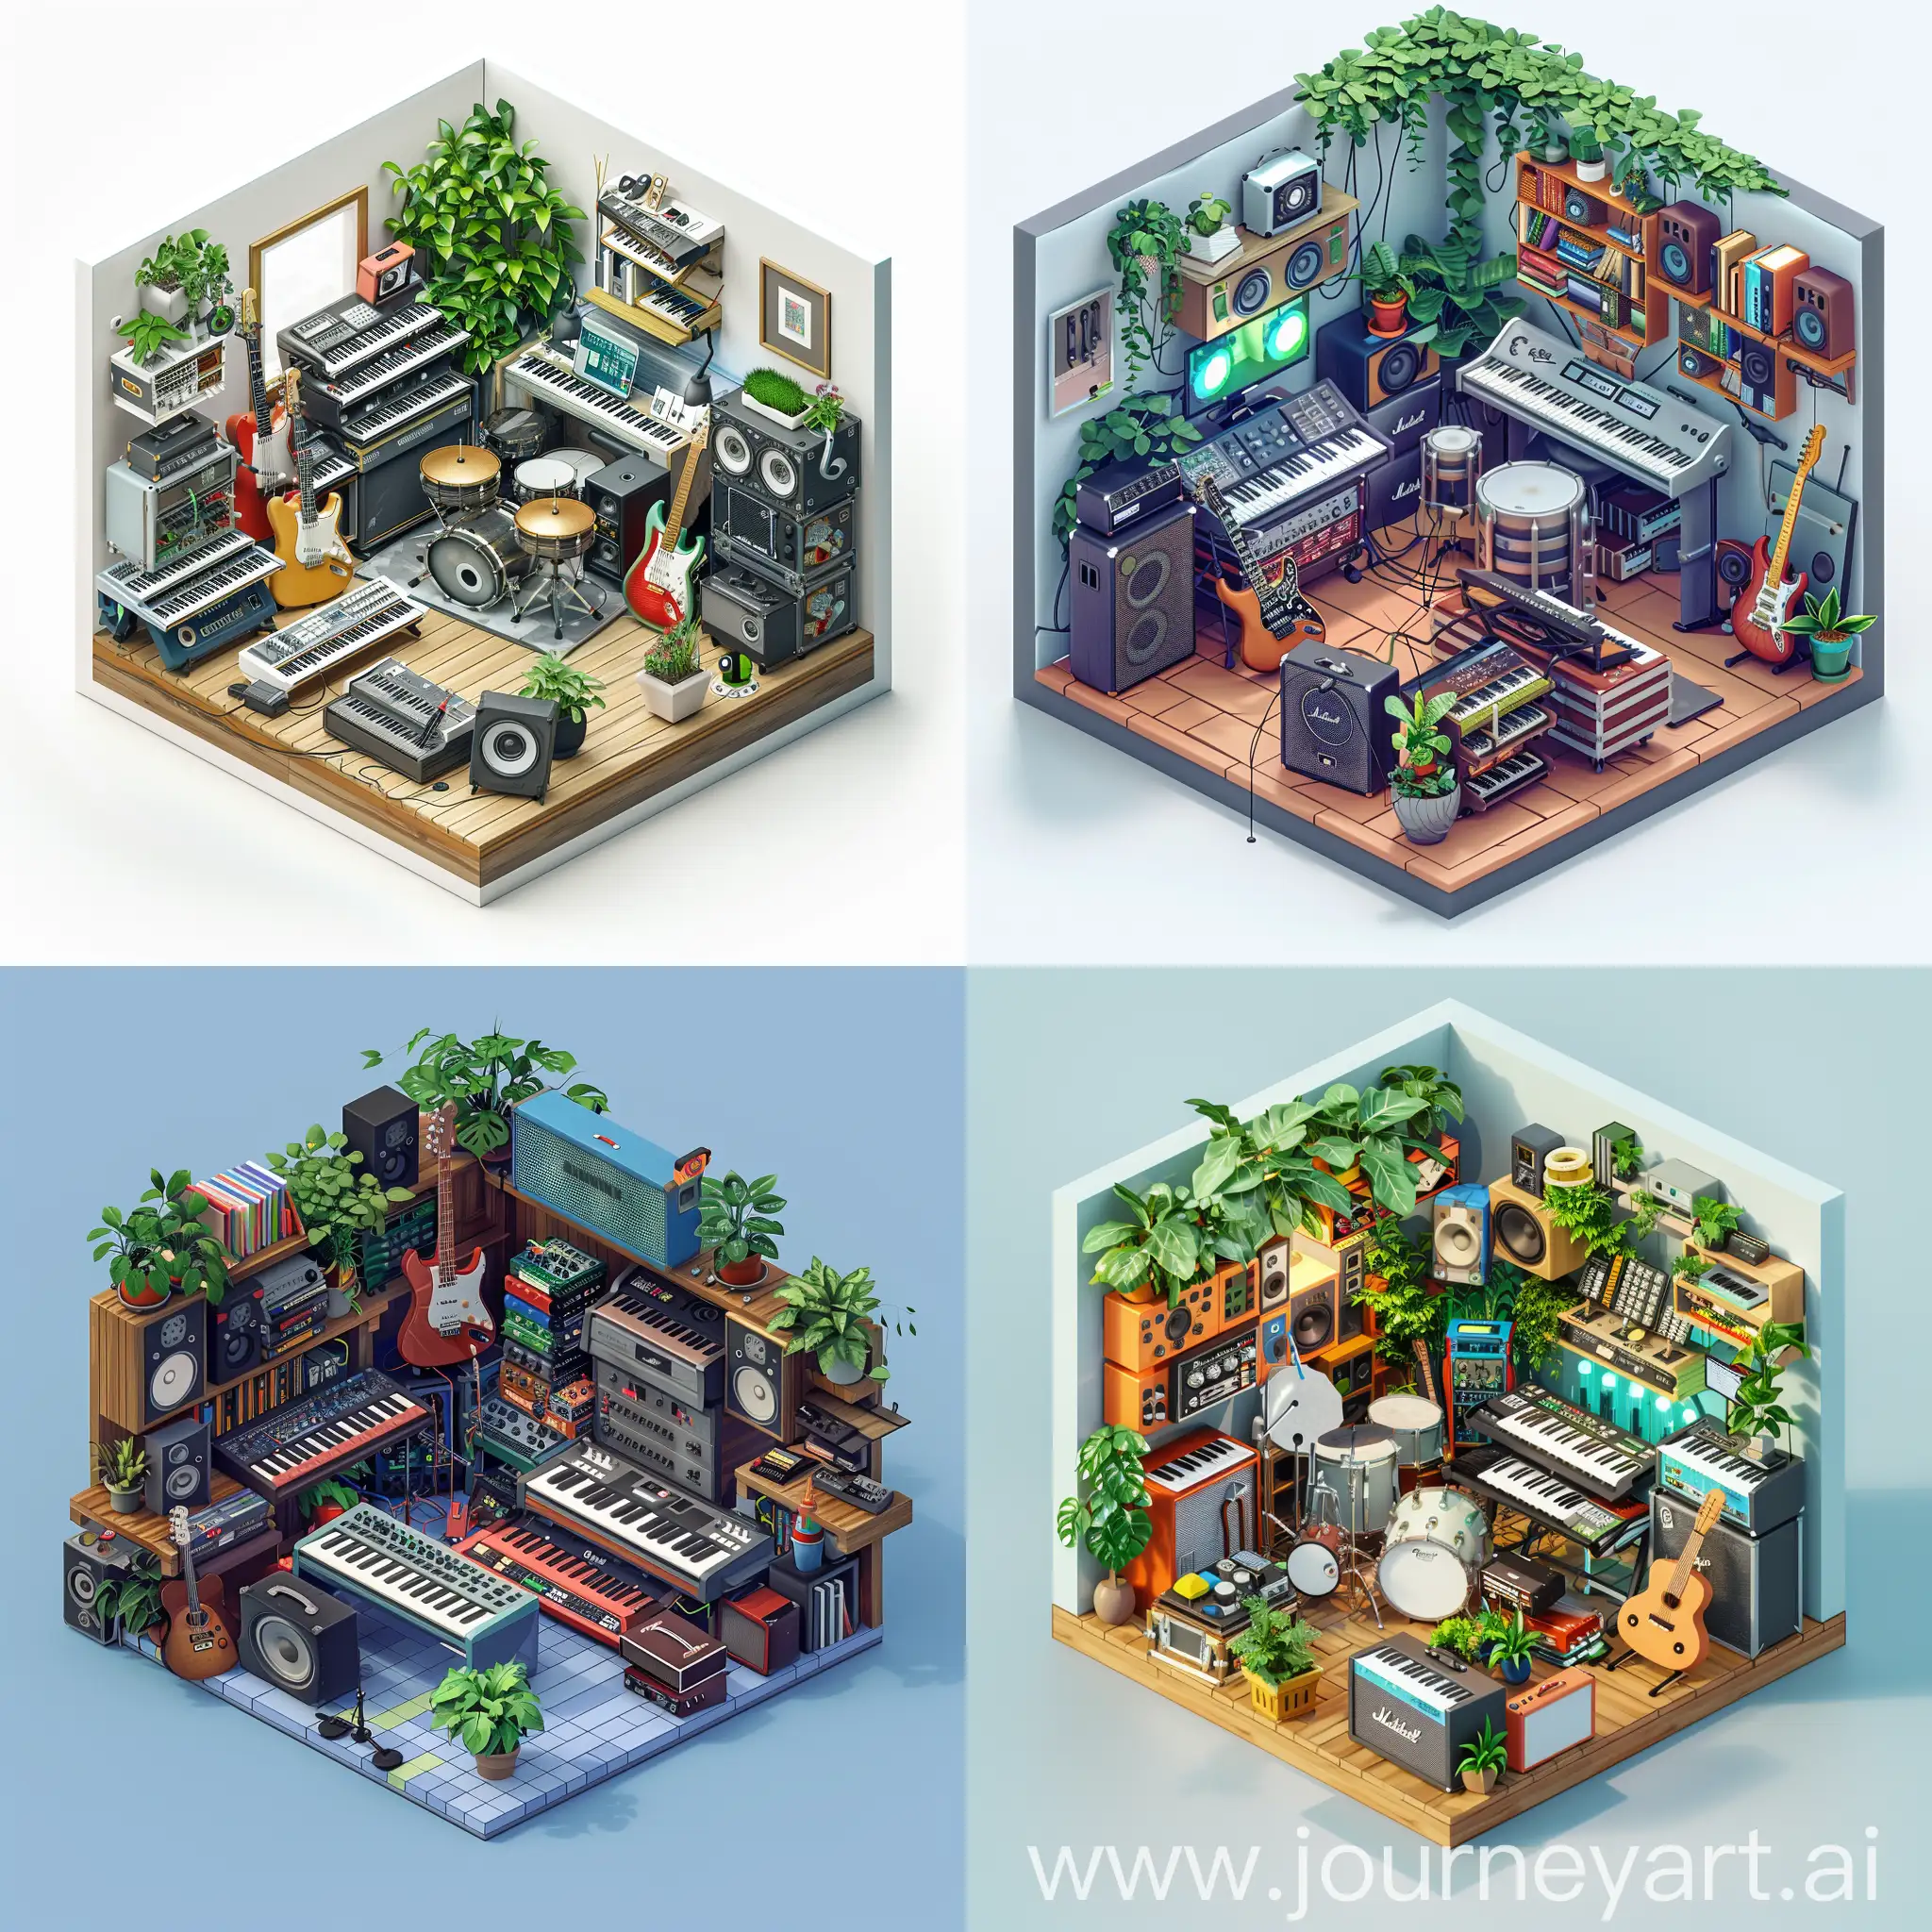 Creative-and-Inspiring-Tiny-Music-Room-Filled-with-Instruments-and-Greenery-in-3D-Isometric-Style